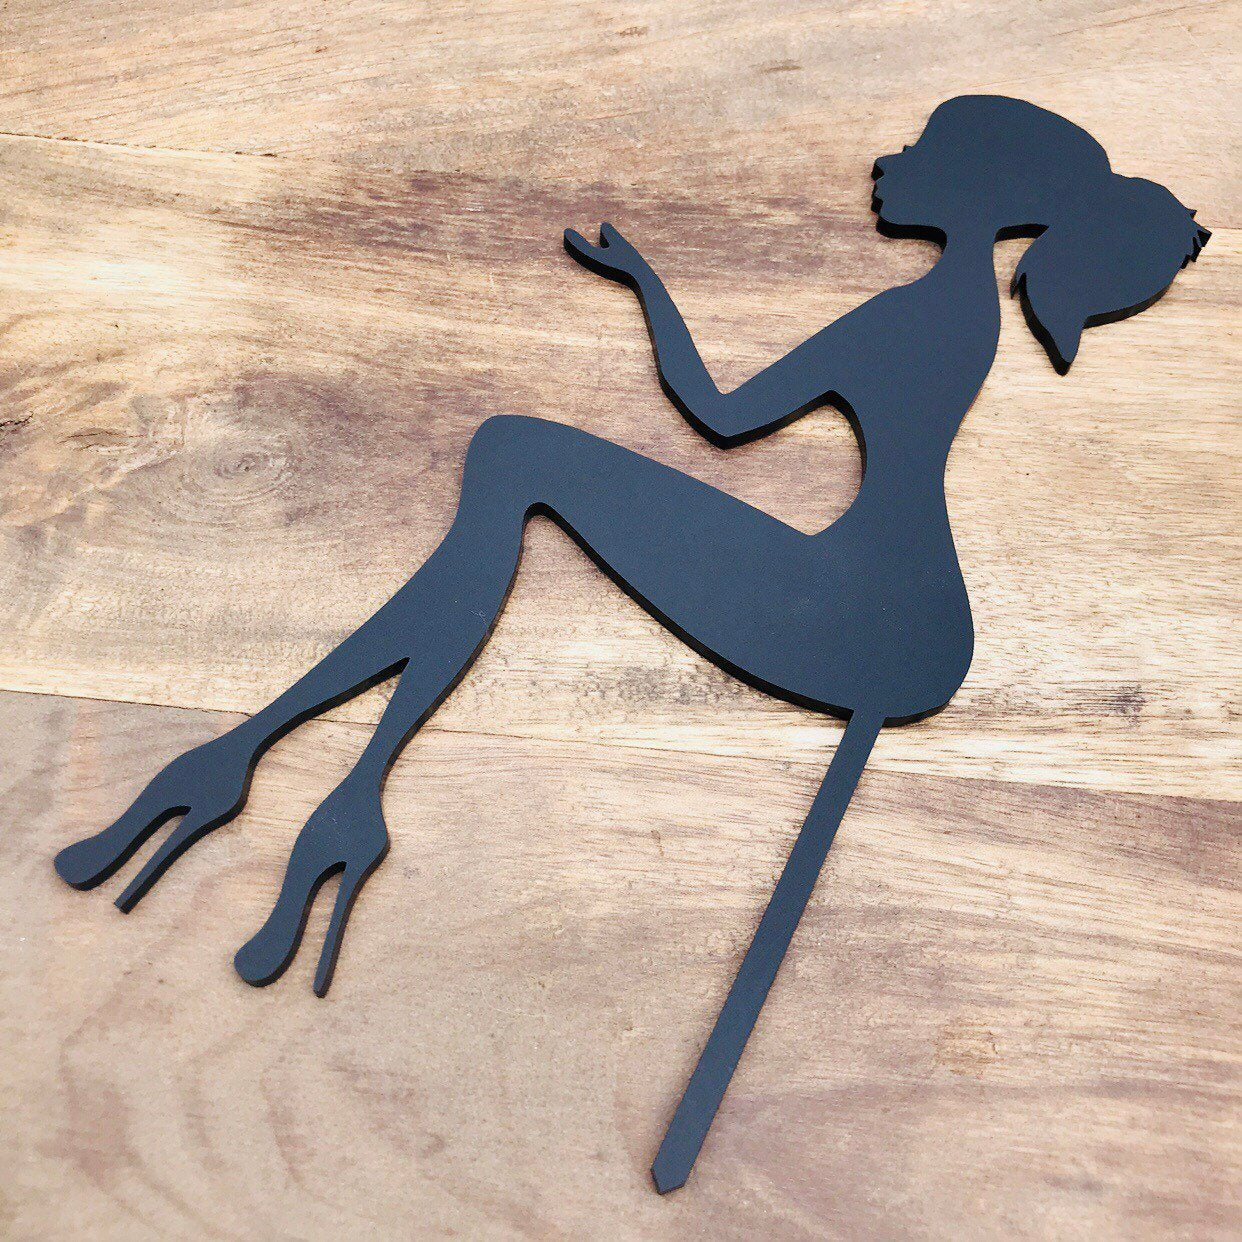 Elegant Lady Silhouette Cake Topper Cake Toppers Cake